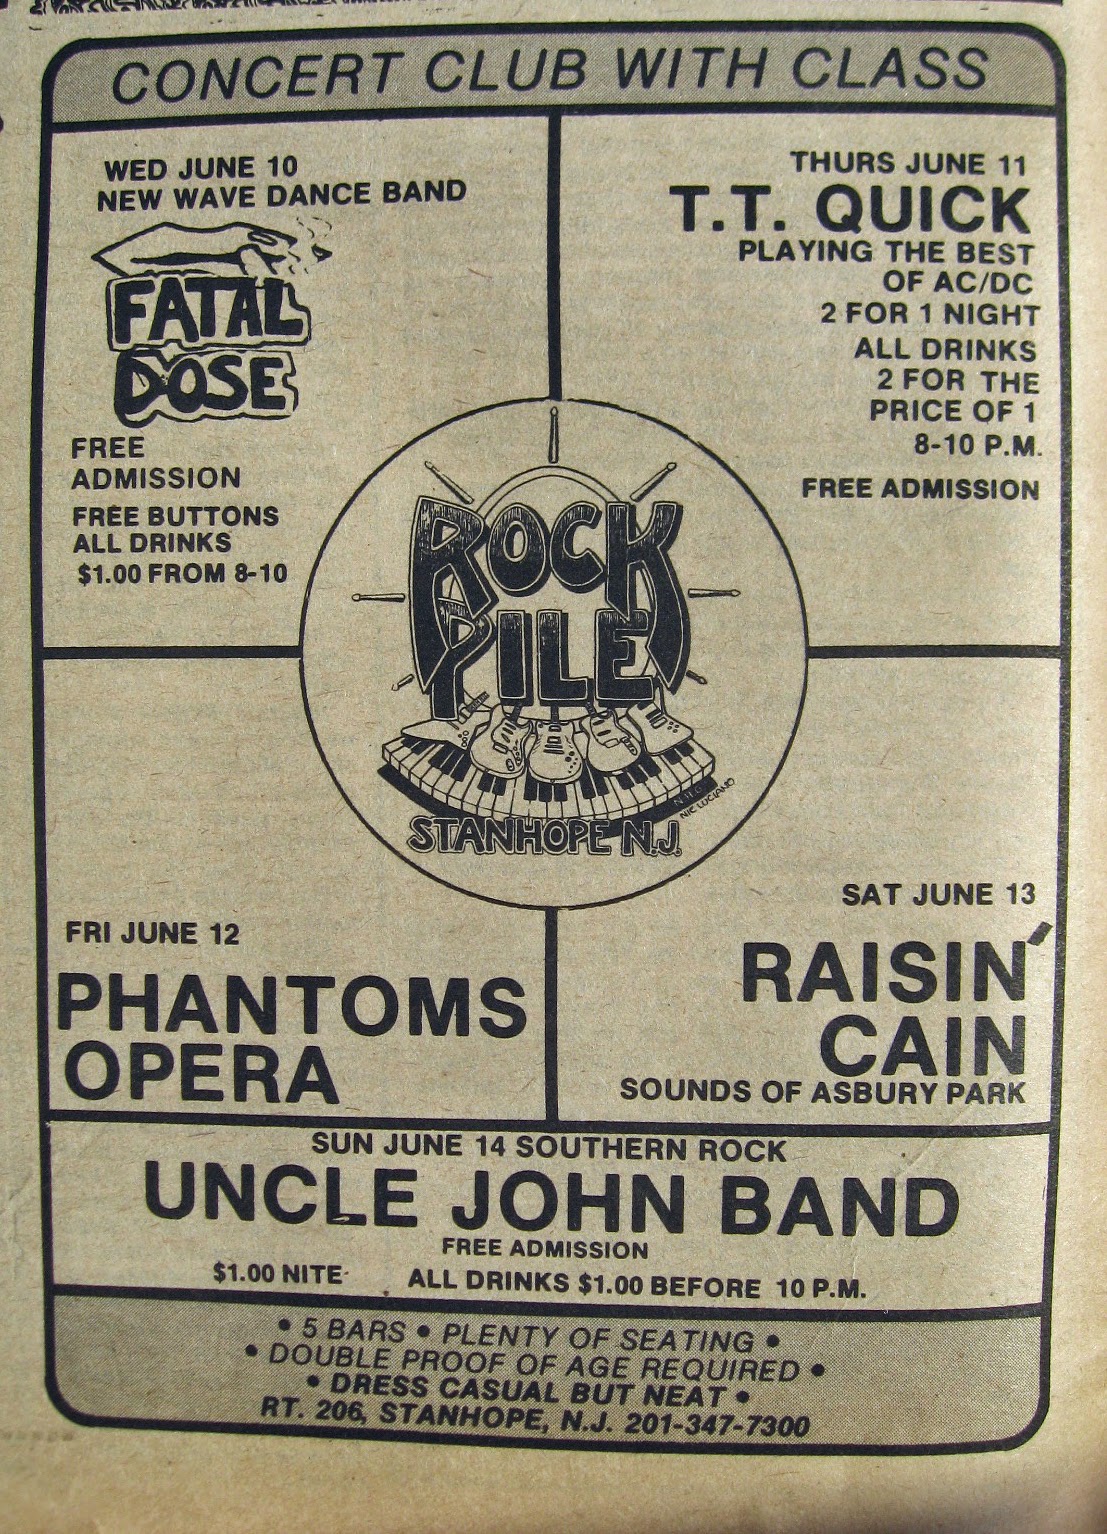 Rock Pile band line up 1981